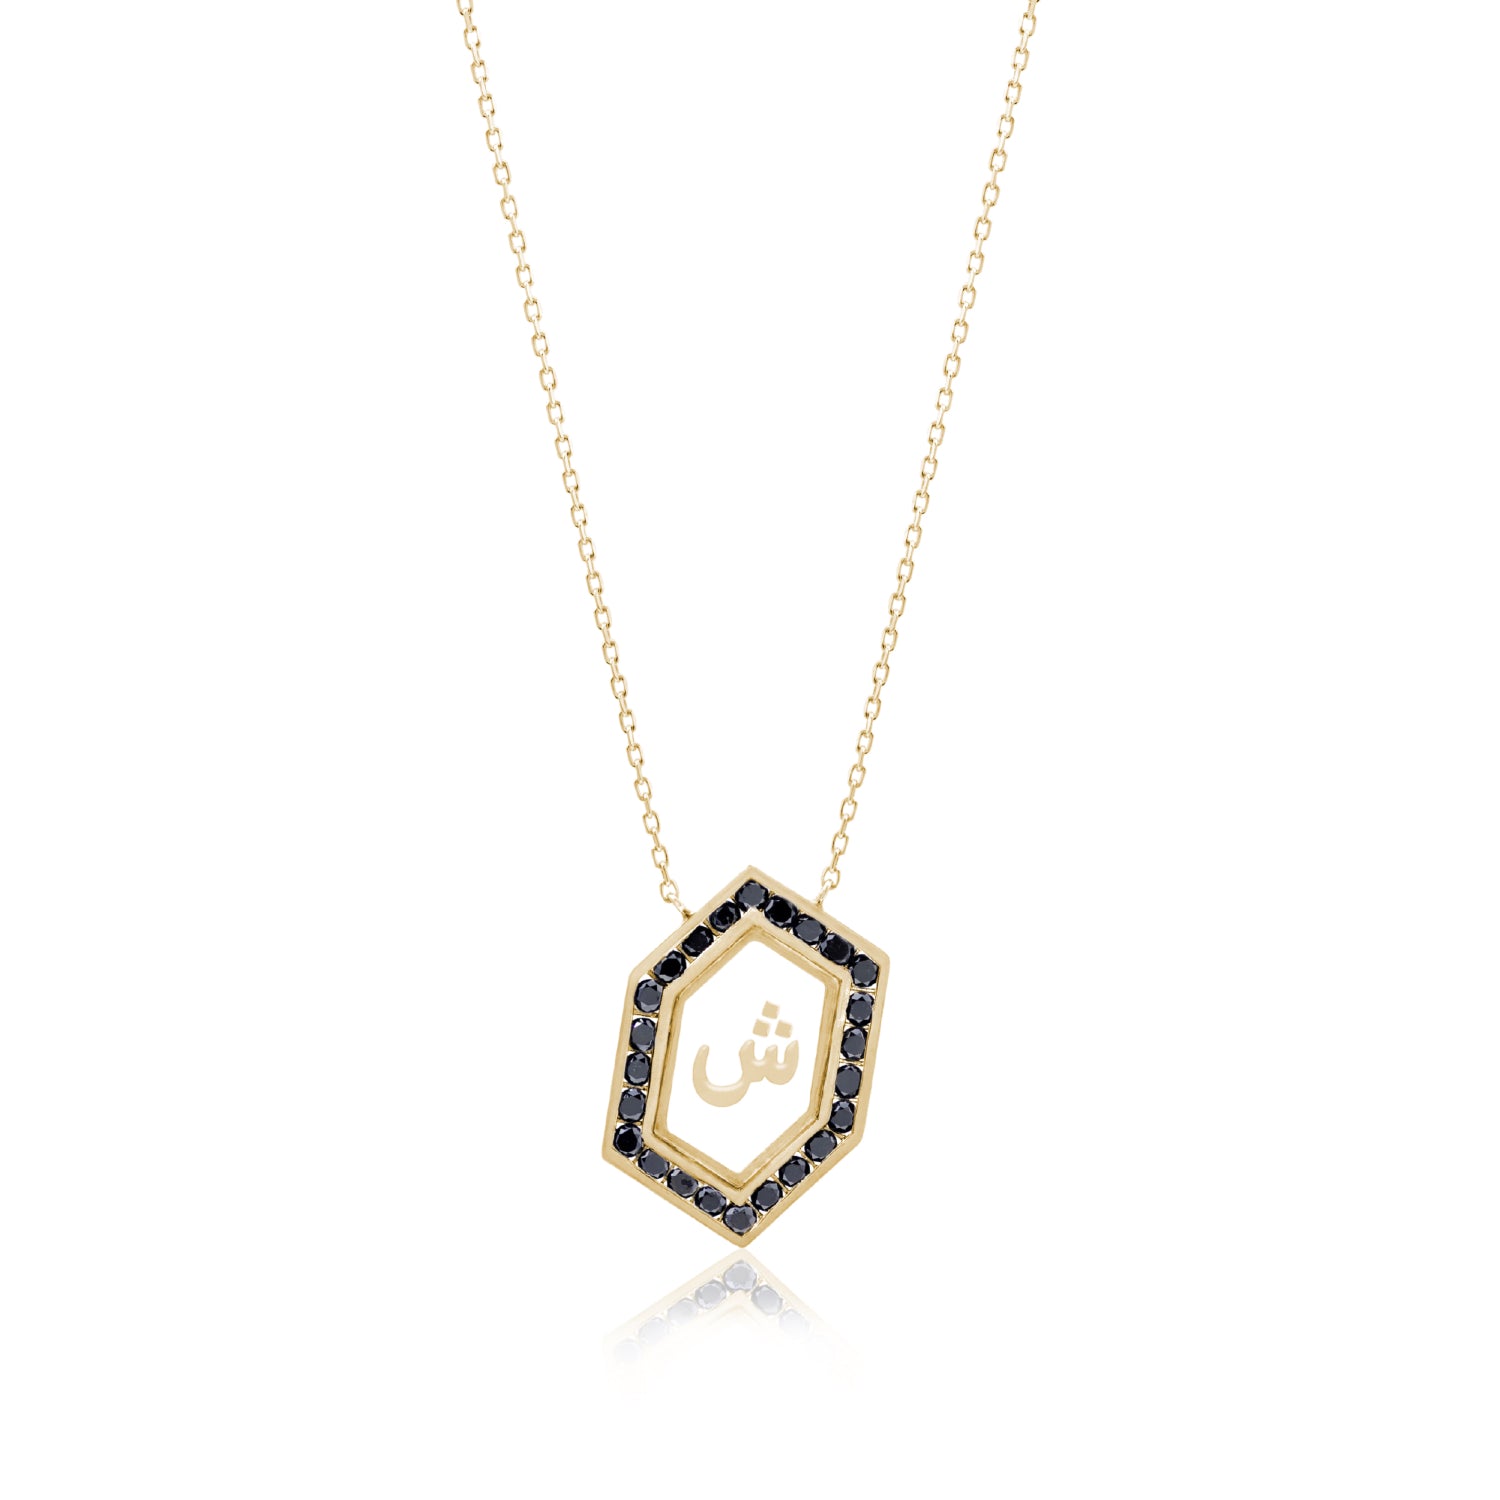 Qamoos 1.0 Letter ش Black Diamond Necklace in Yellow Gold